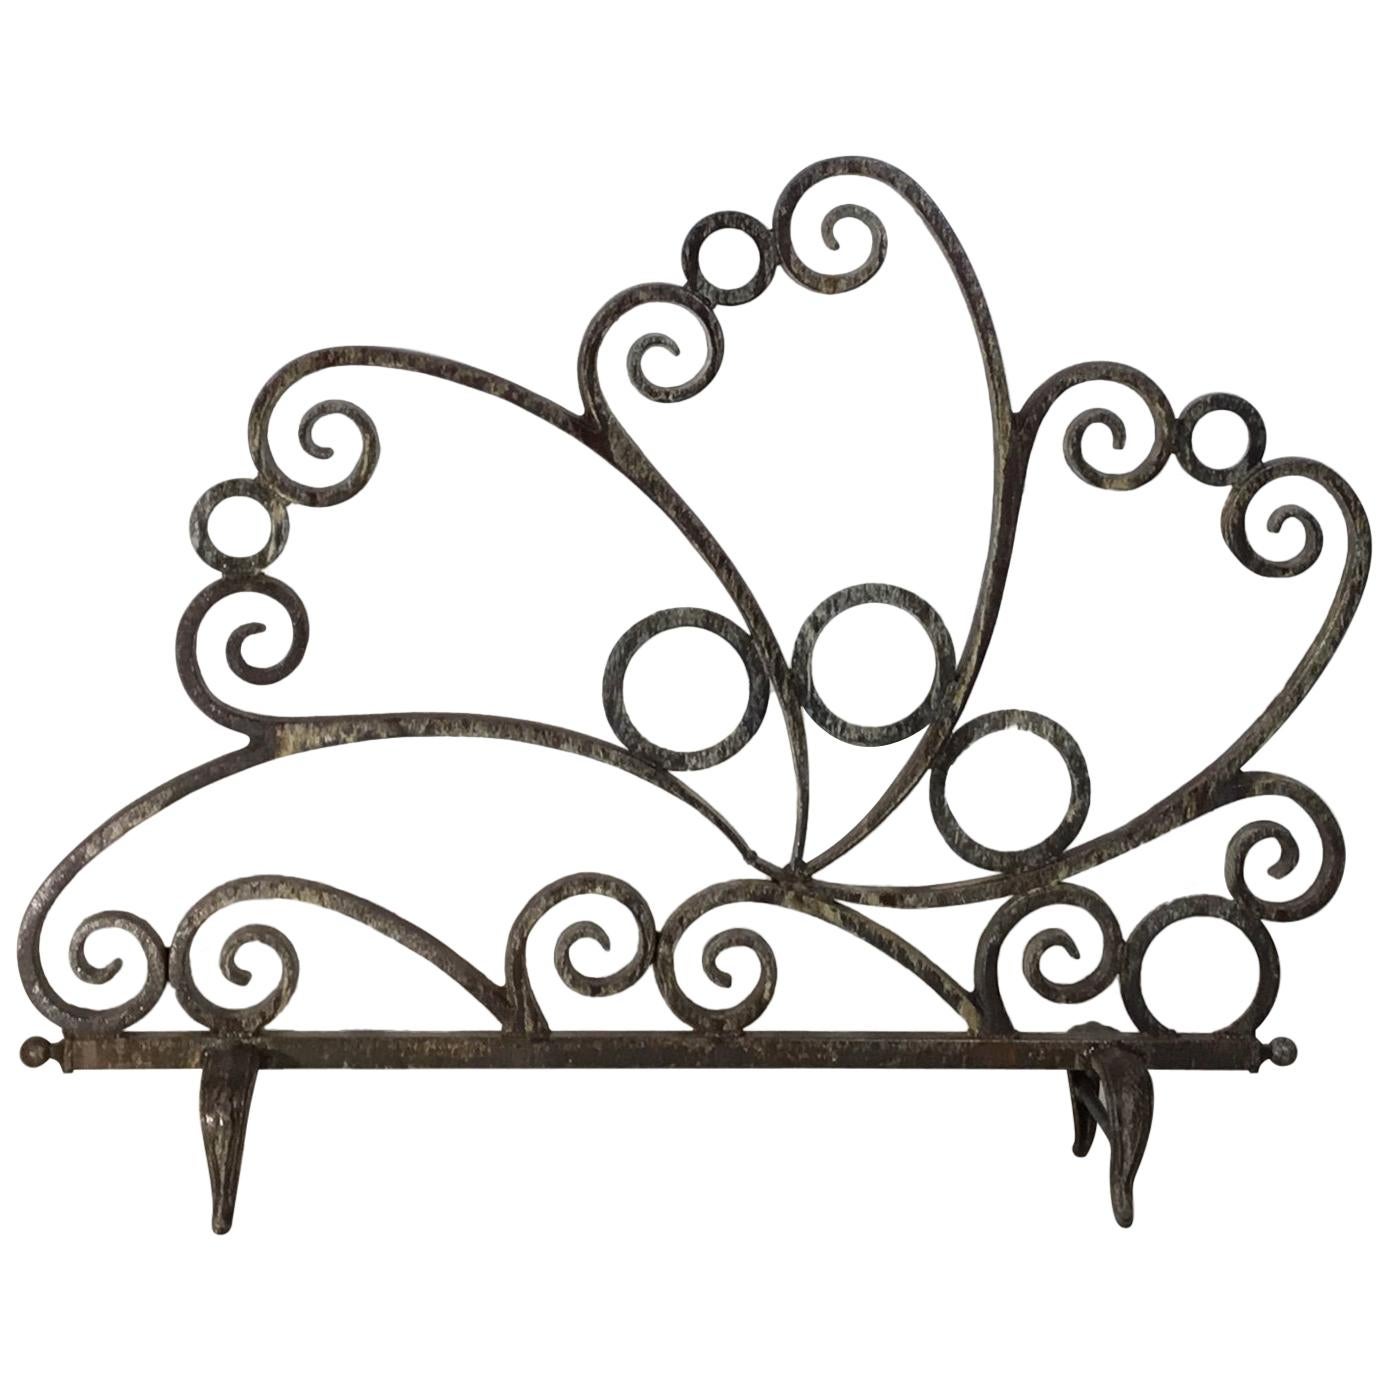 Cast and Wrought Iron Fireplace Screen